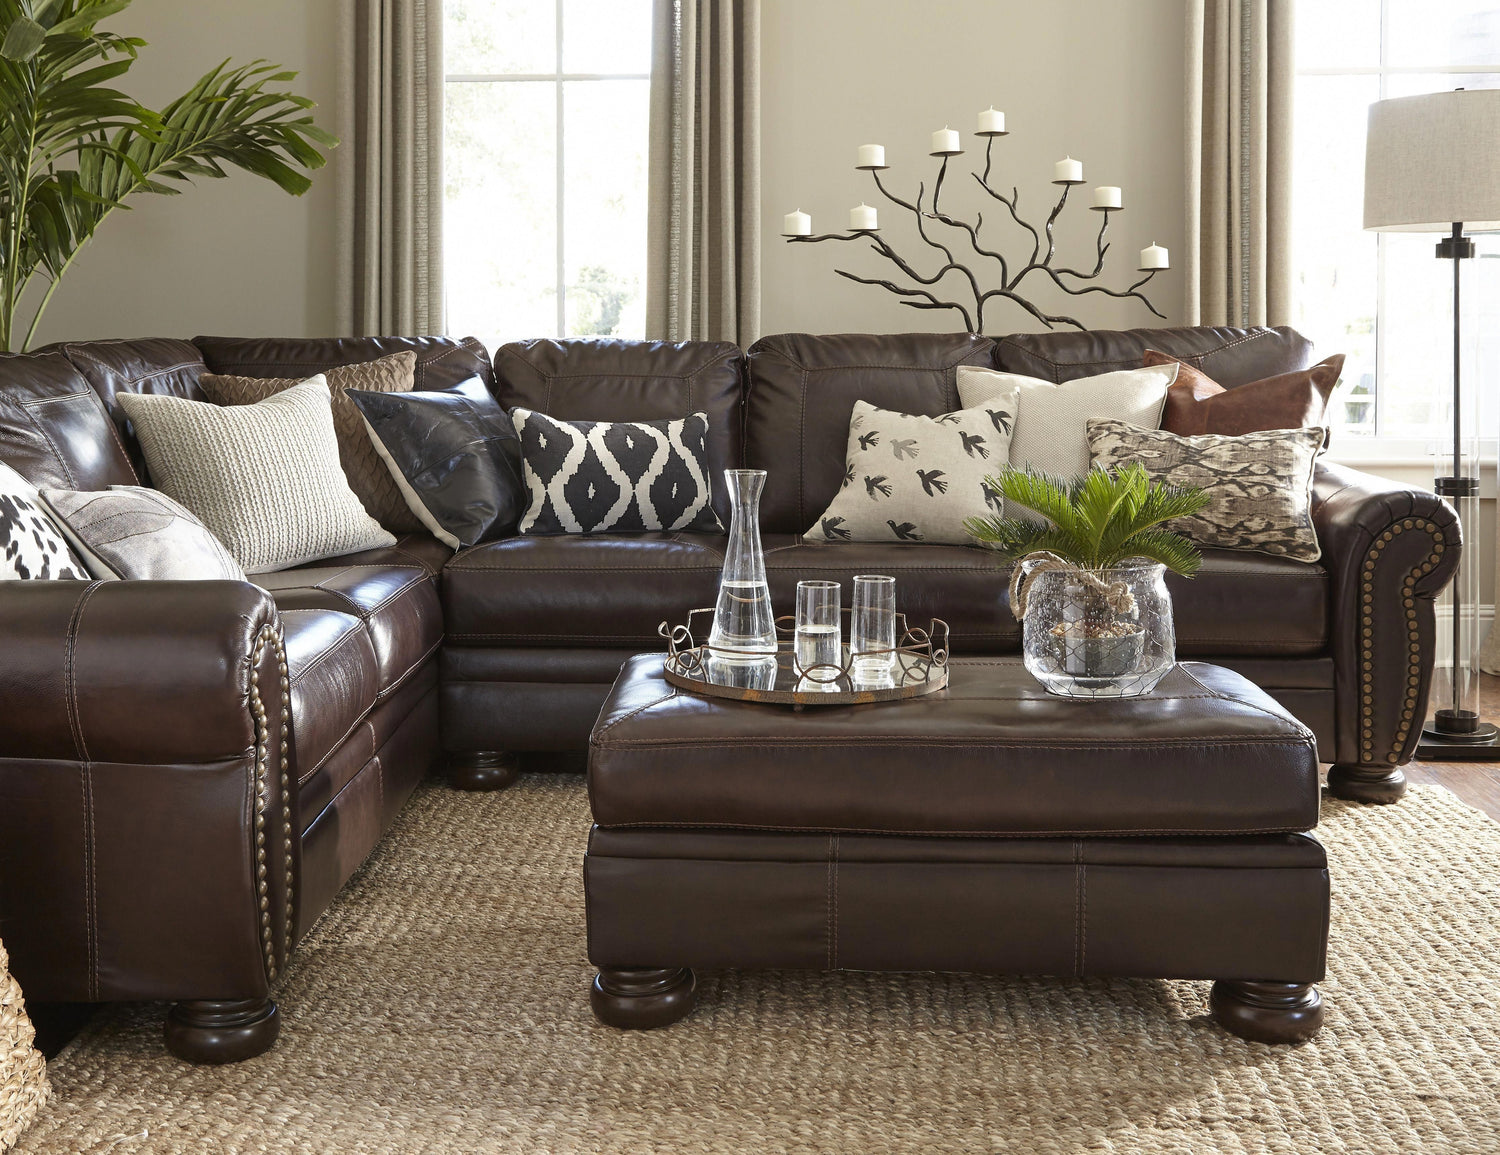 A cozy living room with a dark brown leather sectional sofa adorned with patterned throw pillows. A matching leather ottoman holds a decorative tray with glassware and a potted plant. A candelabra stands behind the sofa, with large windows and light curtains in the background.